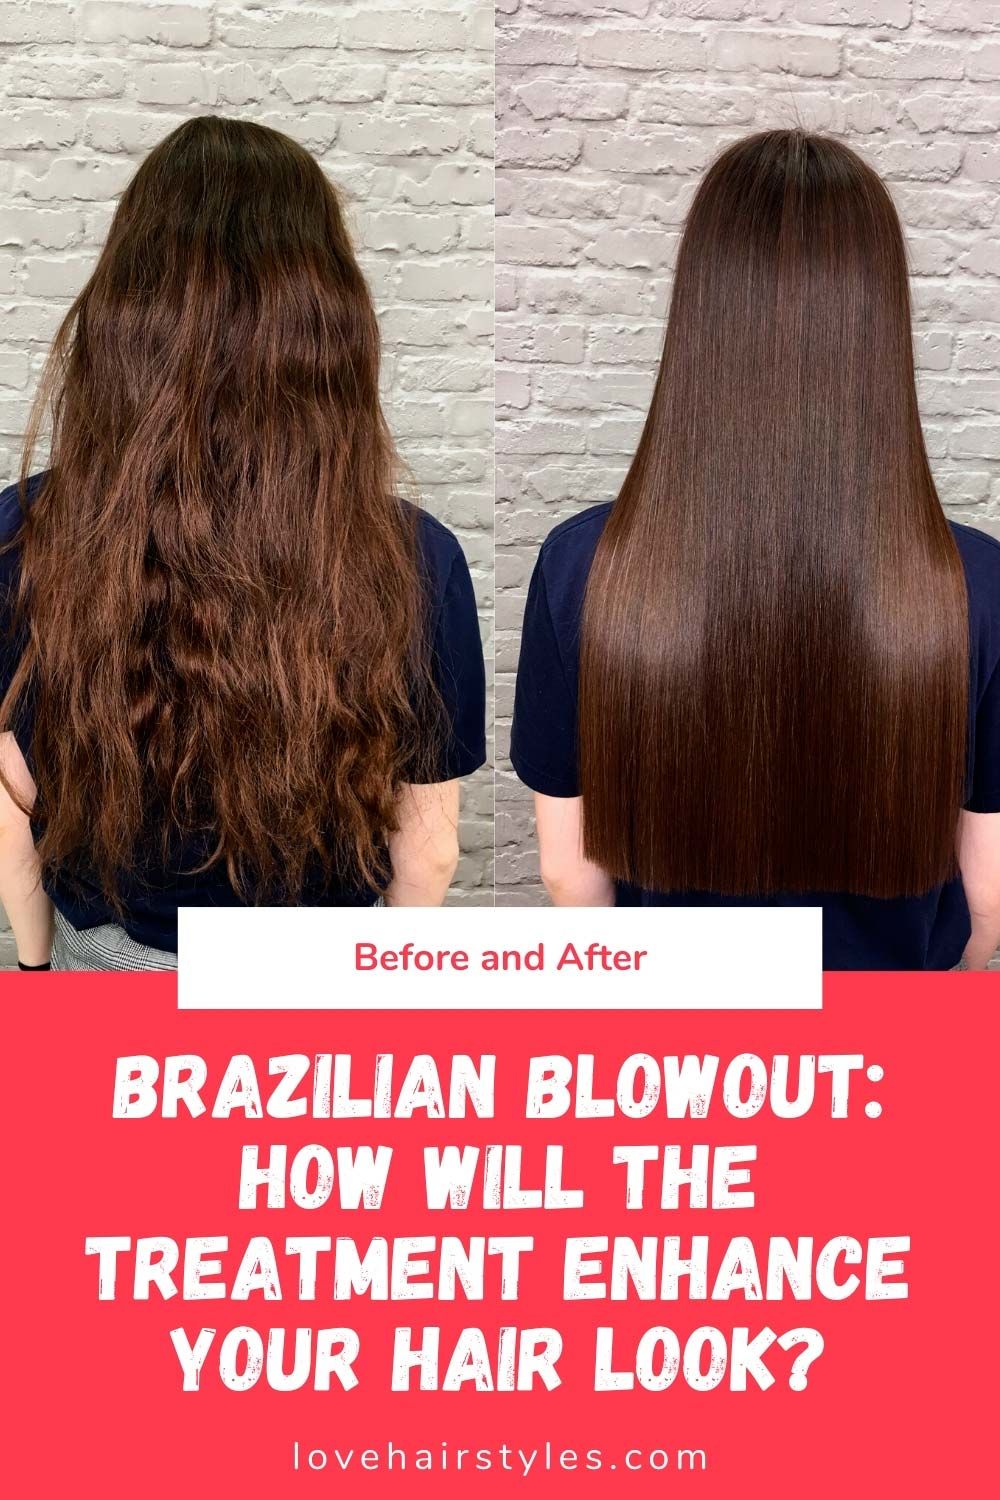 Brazilian Blowout: Before and After